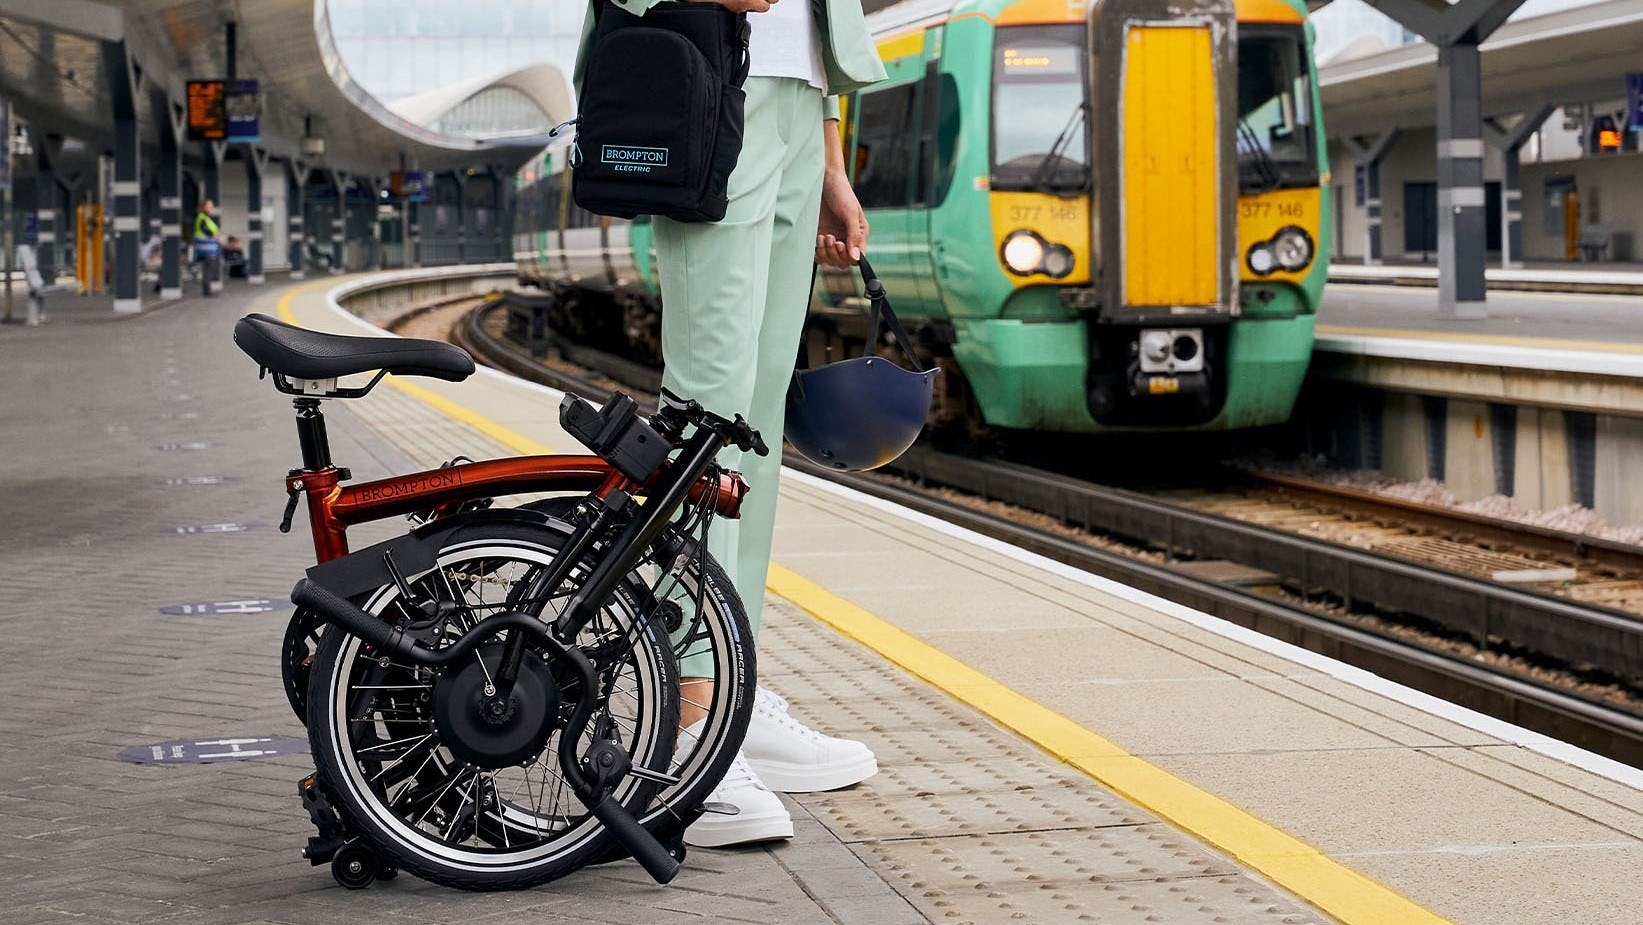 One of the expansion strategies for Brompton is to increase direct to consumer sales. – Photo Brompton